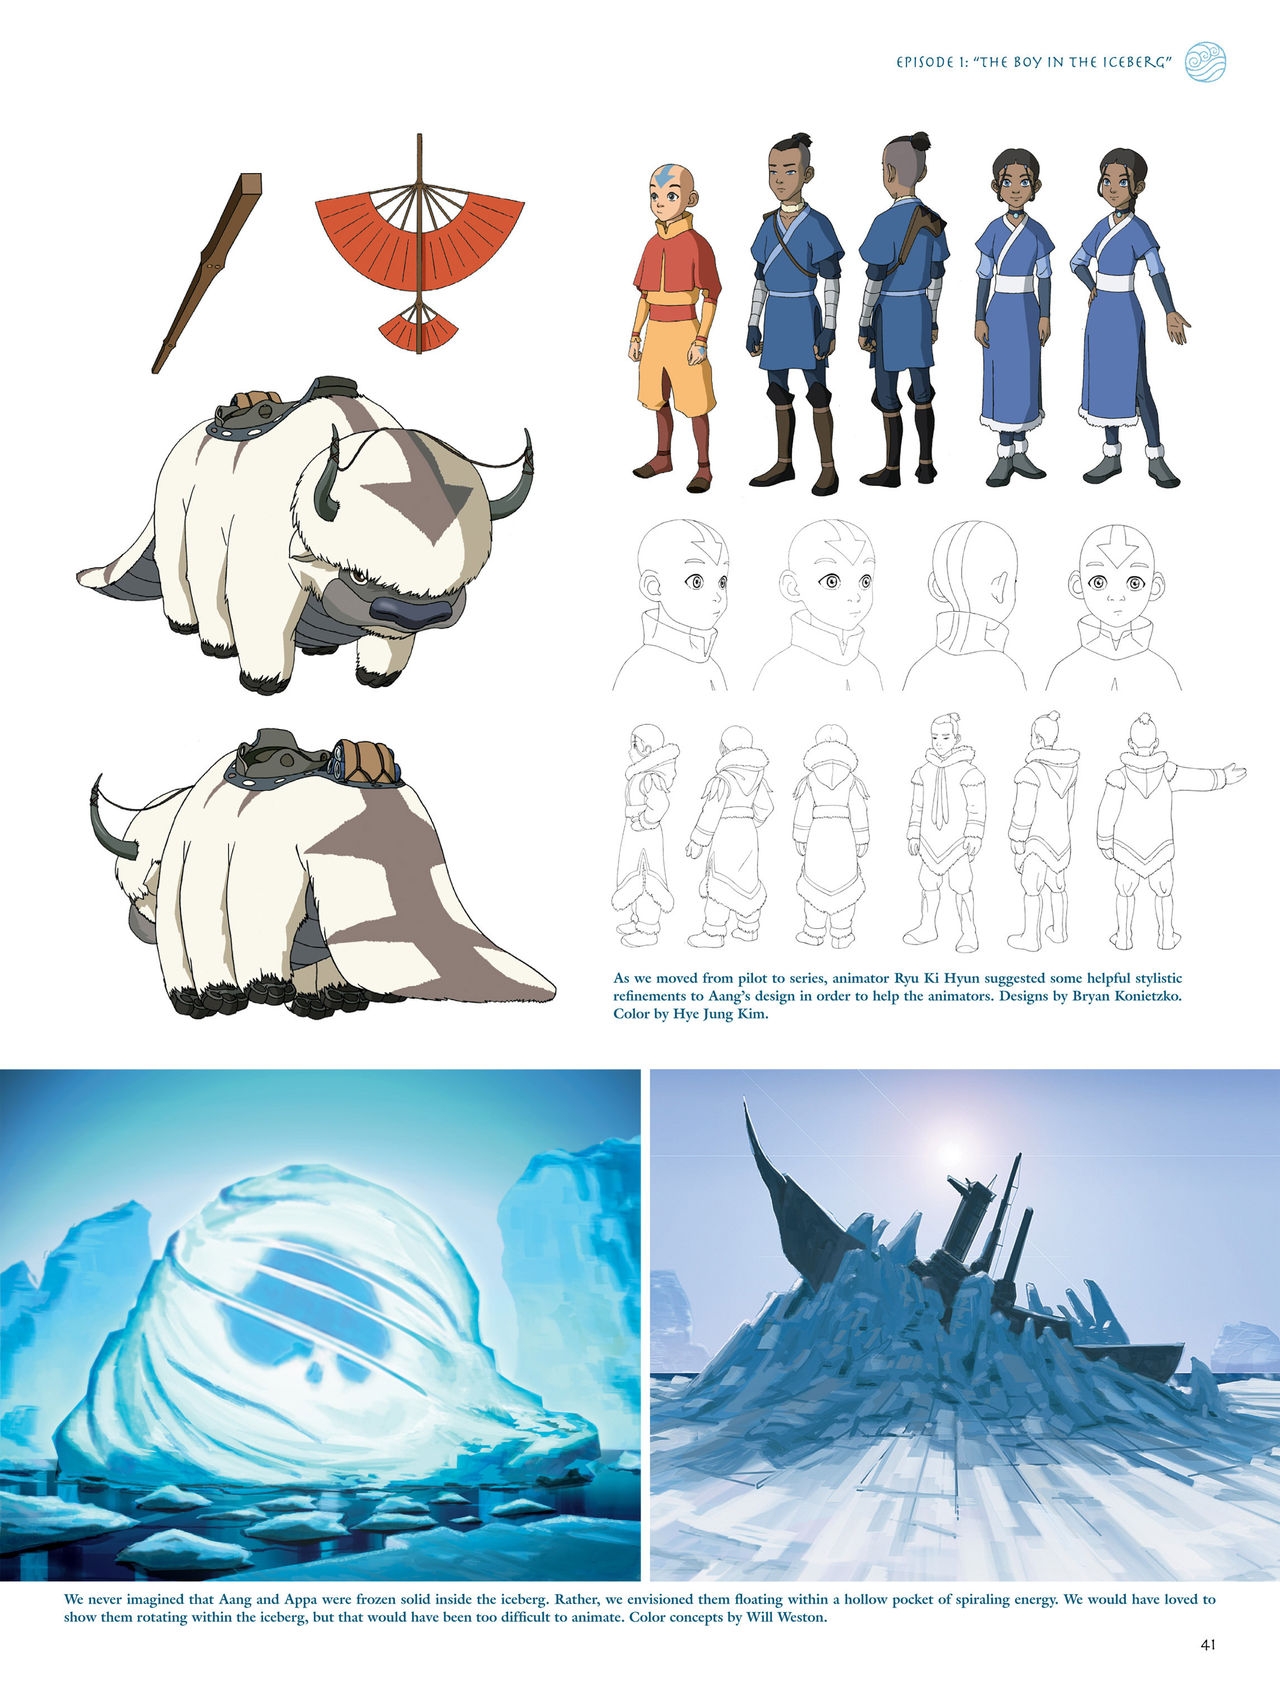 Avatar - The Last Airbender - The Art of the Animated Series 41